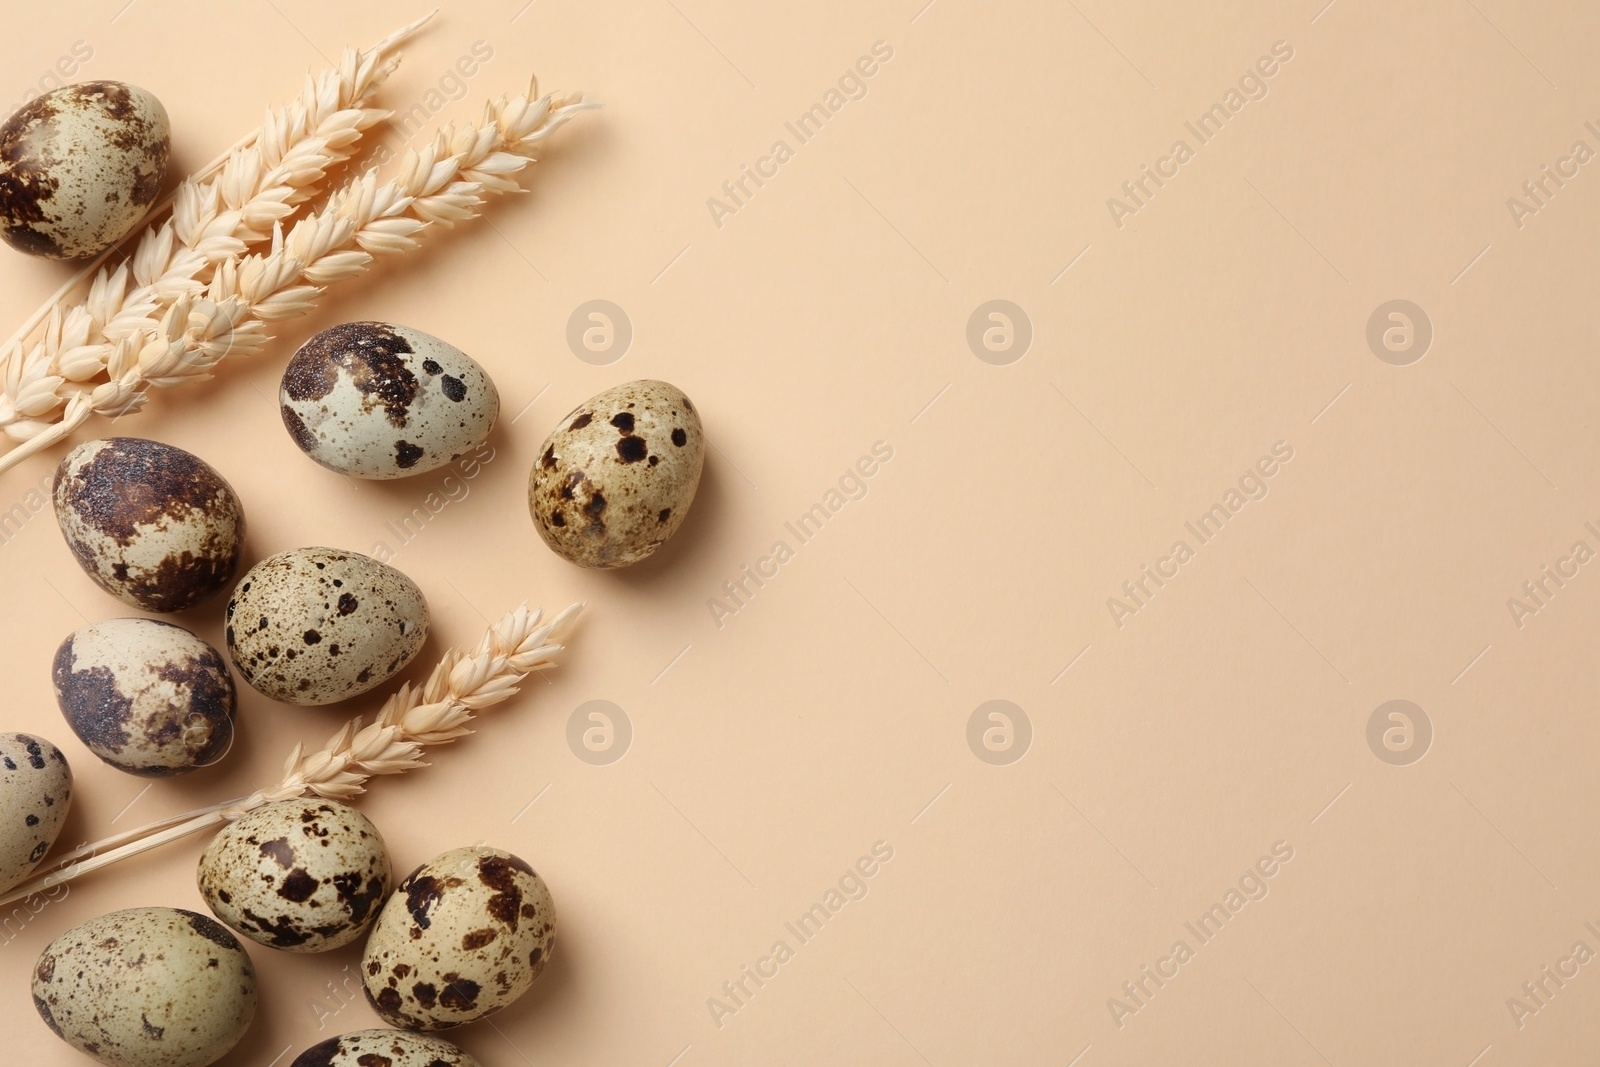 Photo of Many speckled quail eggs and decorative ears of wheat on beige background, flat lay. Space for text